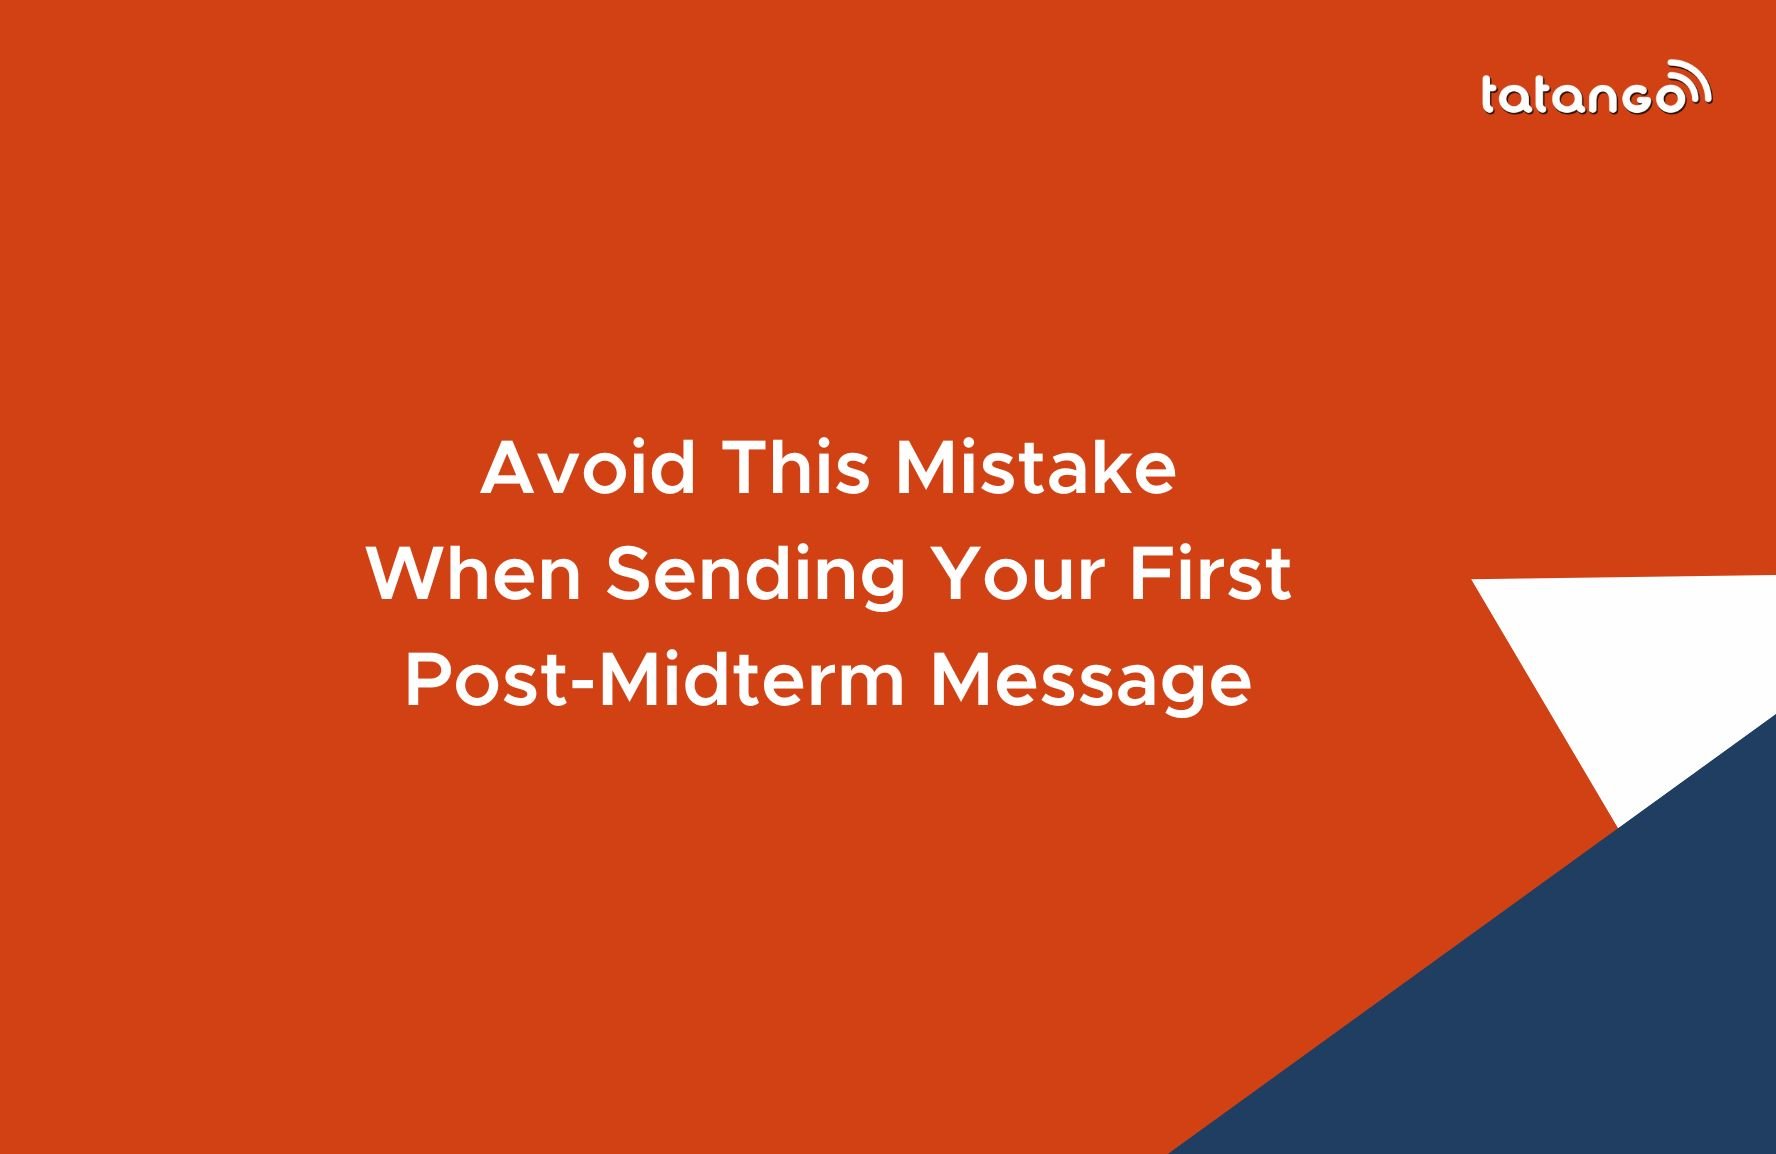 Avoid This Mistake When Sending Your First Post-Midterm Message